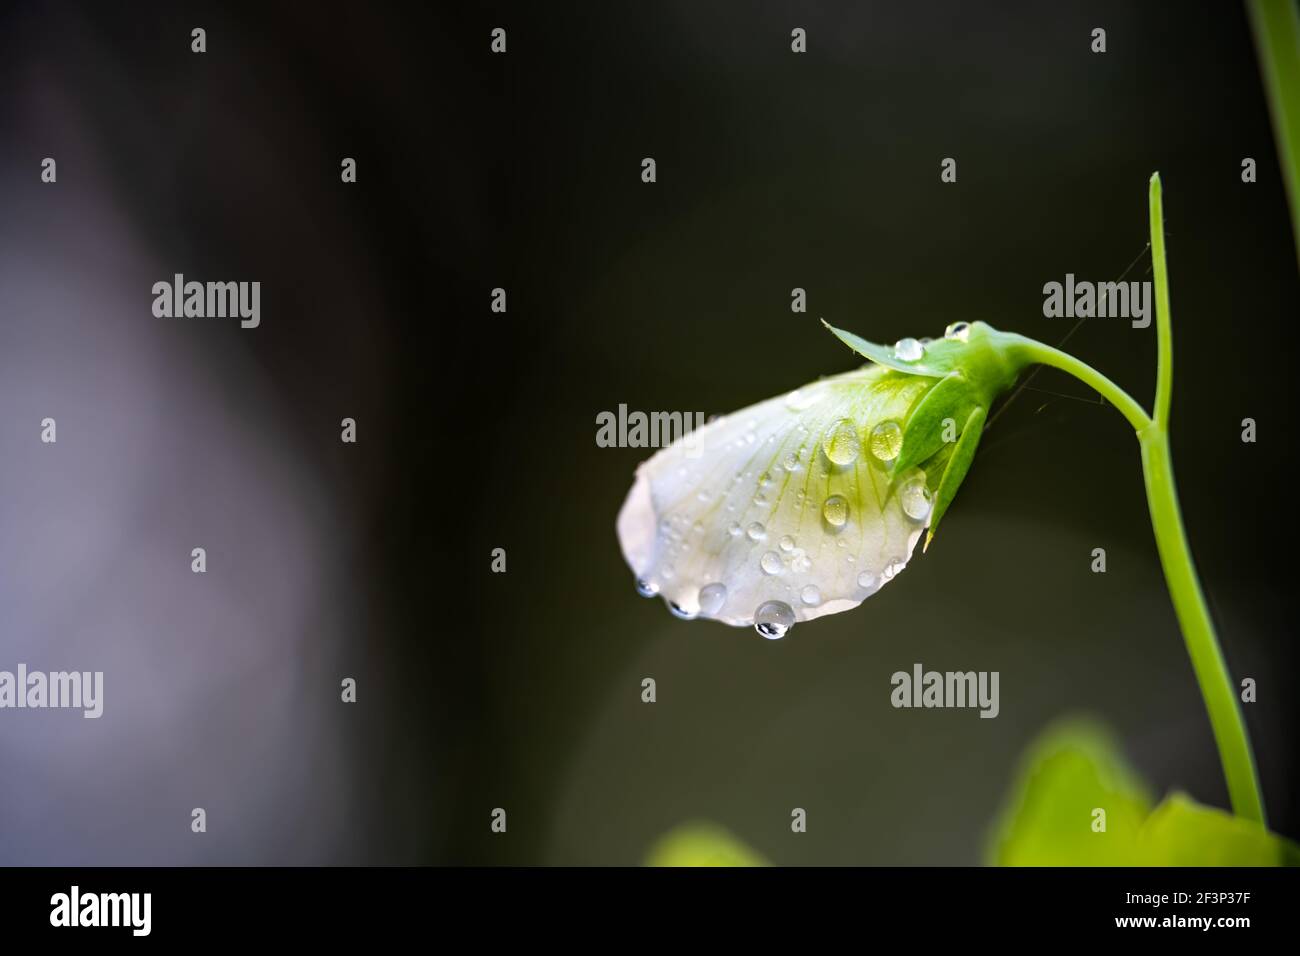 Macro closeup side view of one white flower growing sugar snap pea plant in spring garden with water rain drops droplets with blurry blurred backgroun Stock Photo